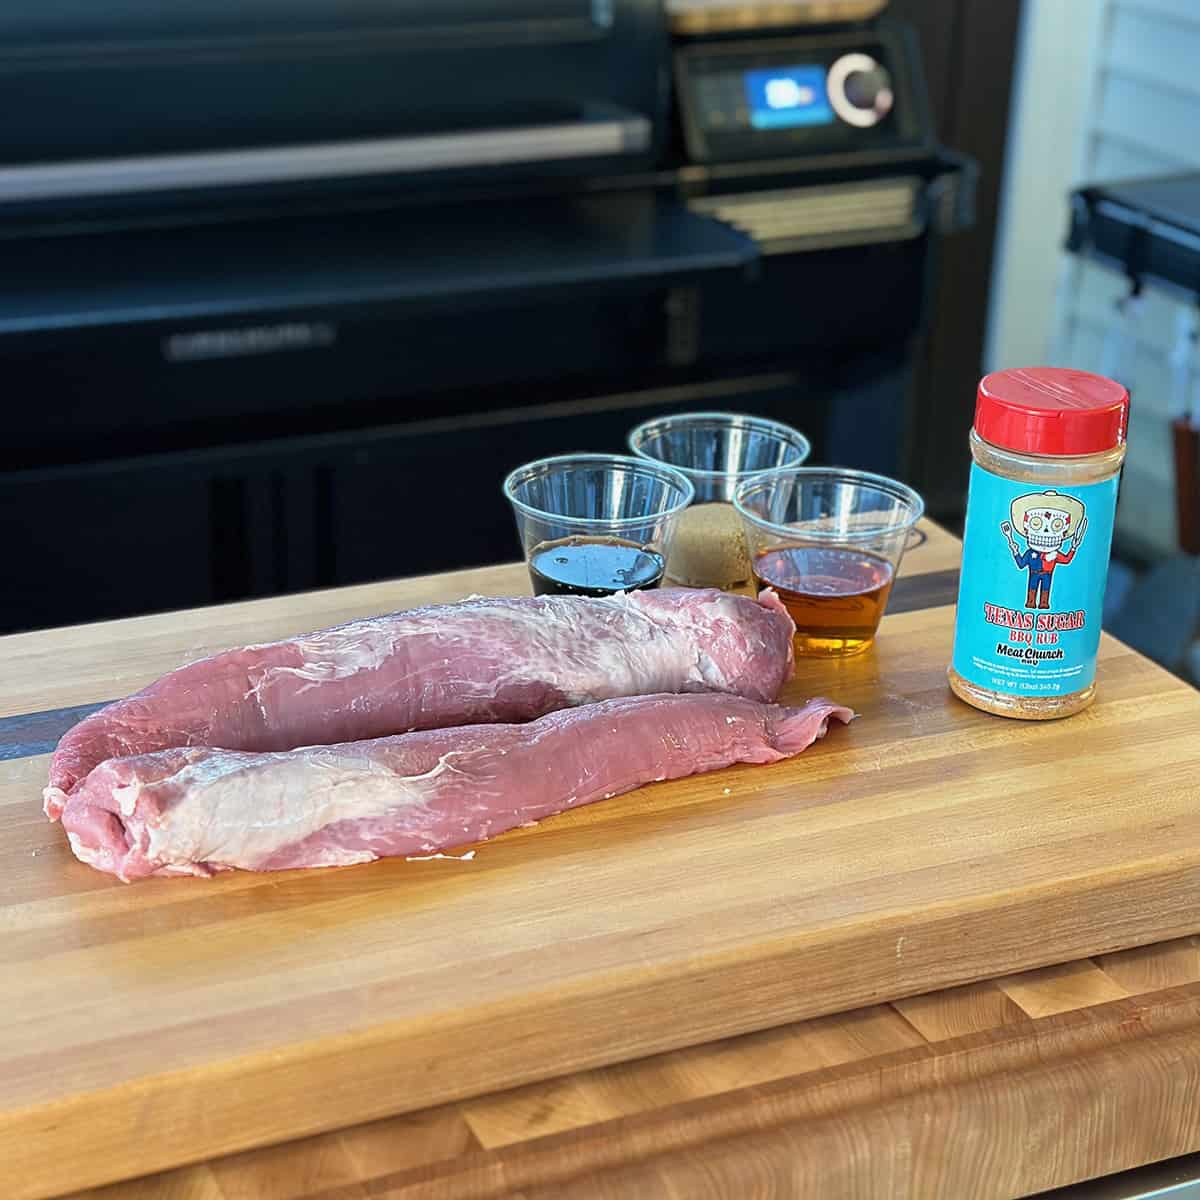 Ingredients for a Smoked Pork Tenderloin on Traeger Timberline XL